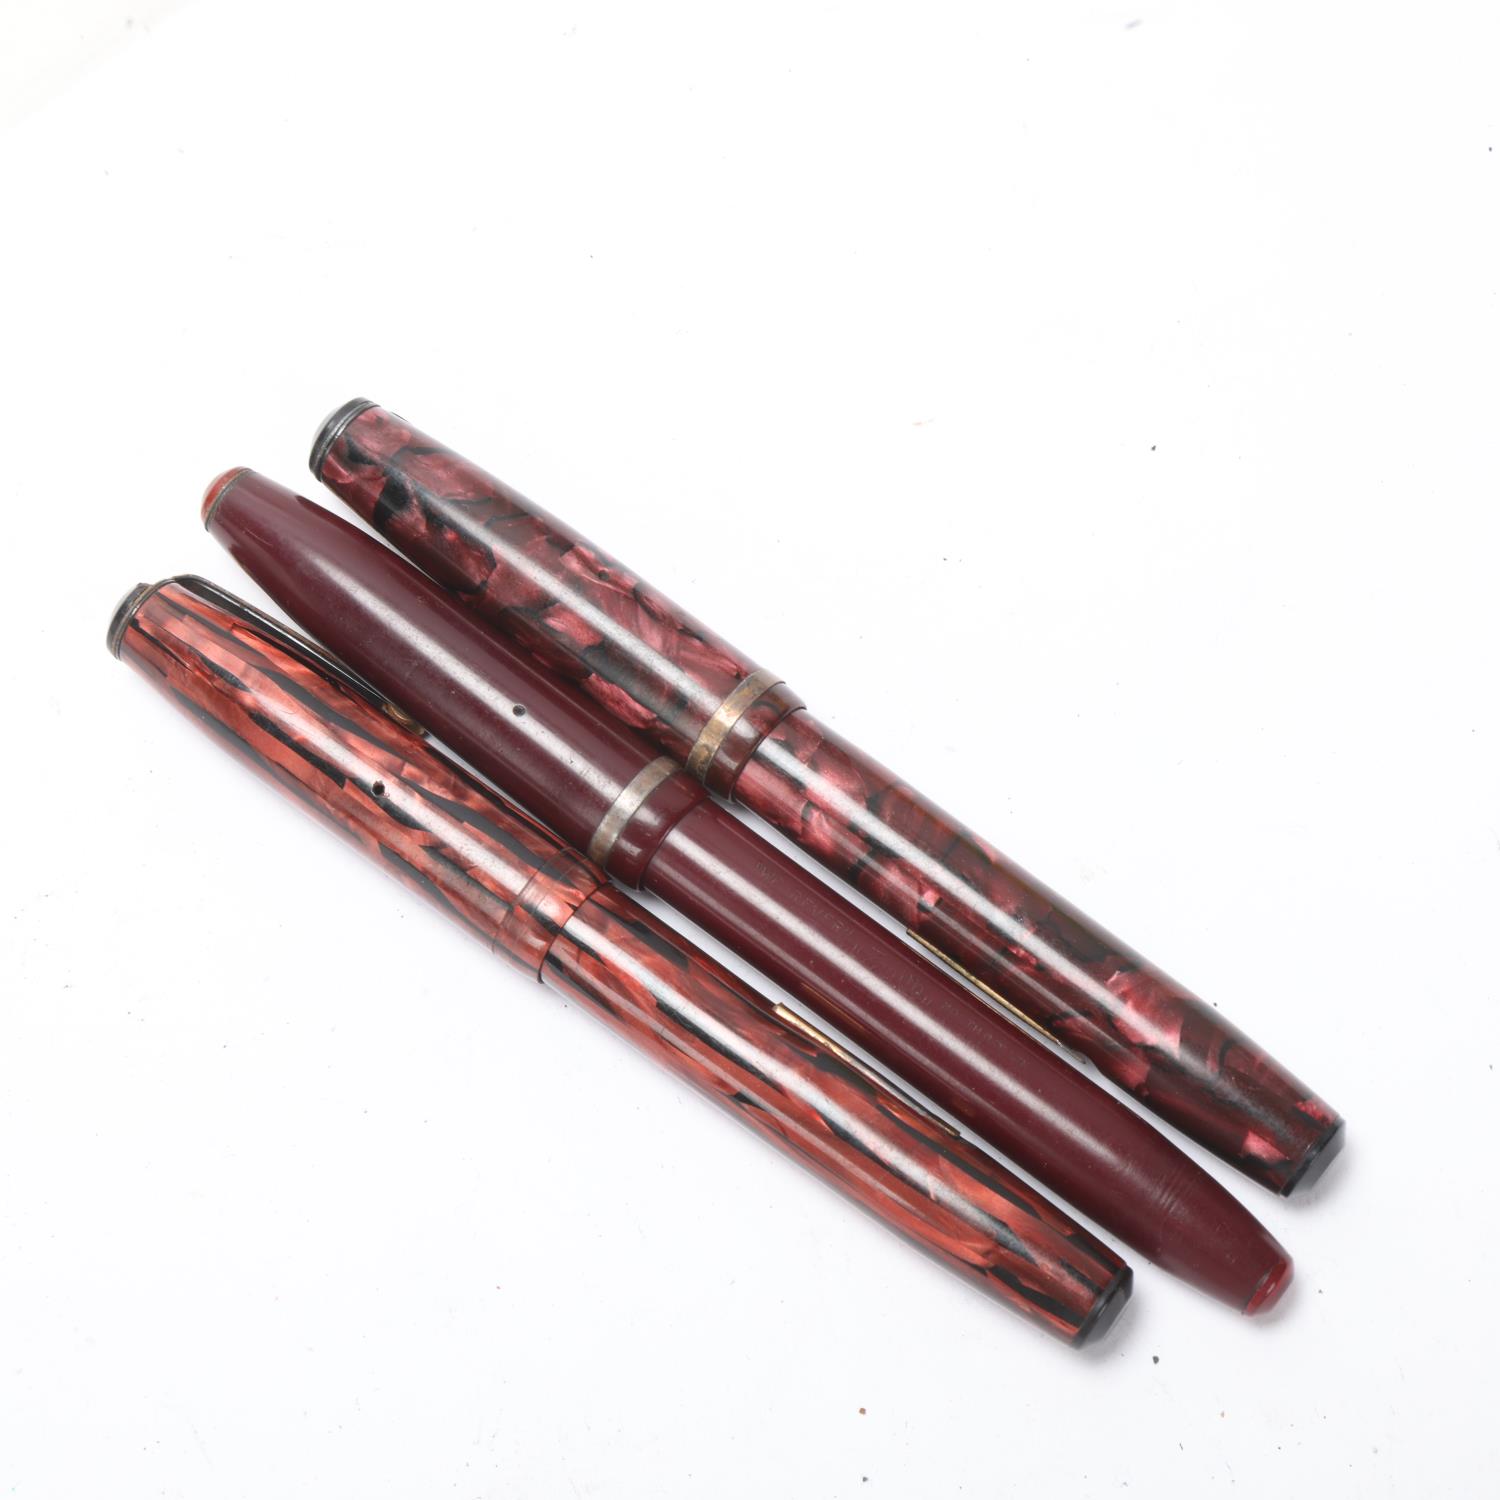 3 vintage Wearever, USA, lever fill fountain pens, circa 1940s' Marbled pens in complete untested - Image 4 of 4